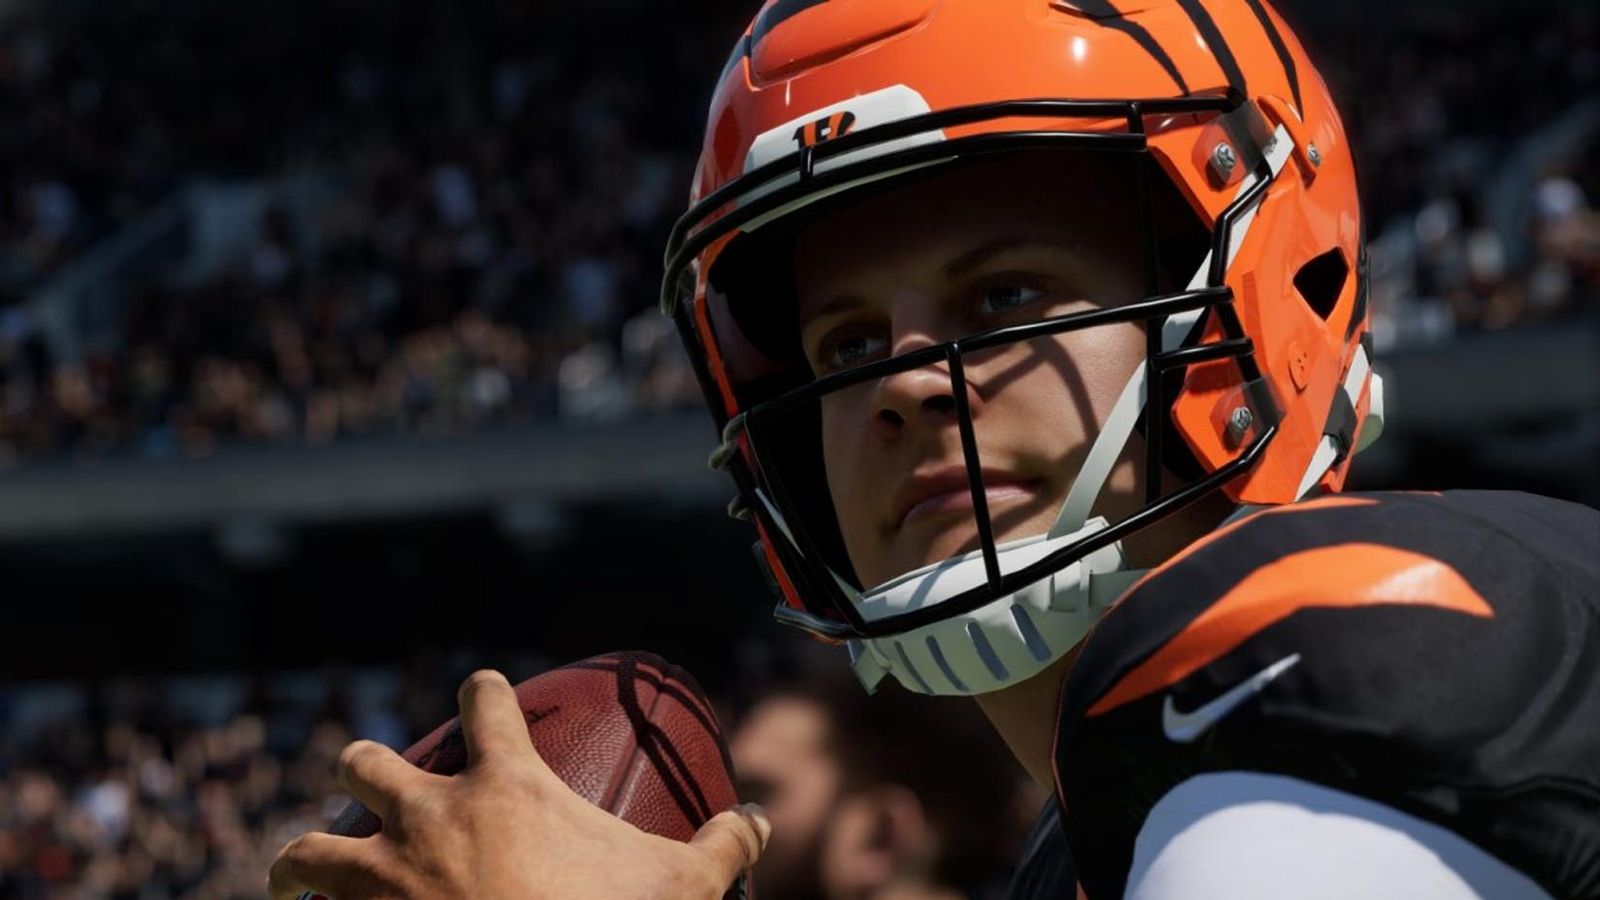 Image showing NFL player holding football in Madden 23